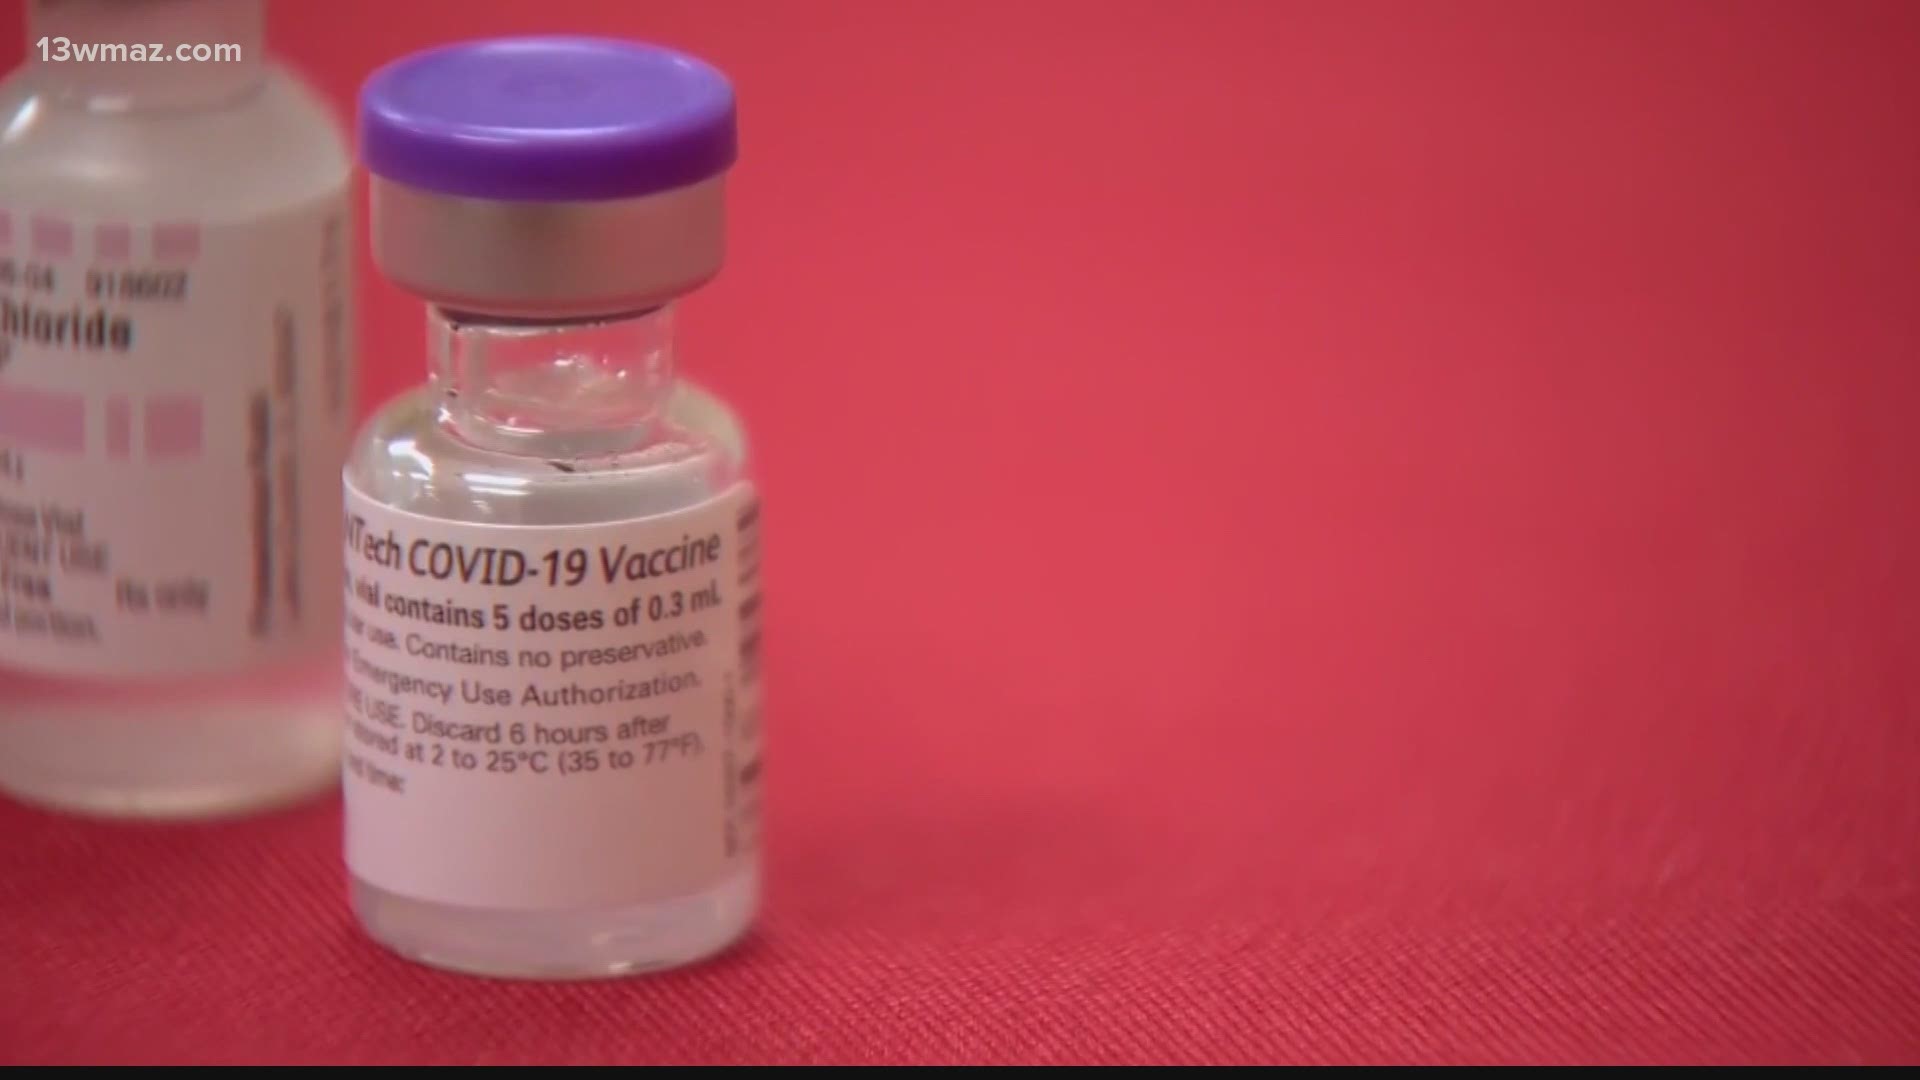 Some healthcare workers in Georgia have already gotten Pfizer's COVID-19 vaccine. Moderna's is expected to be approved for emergency use authorization by the FDA